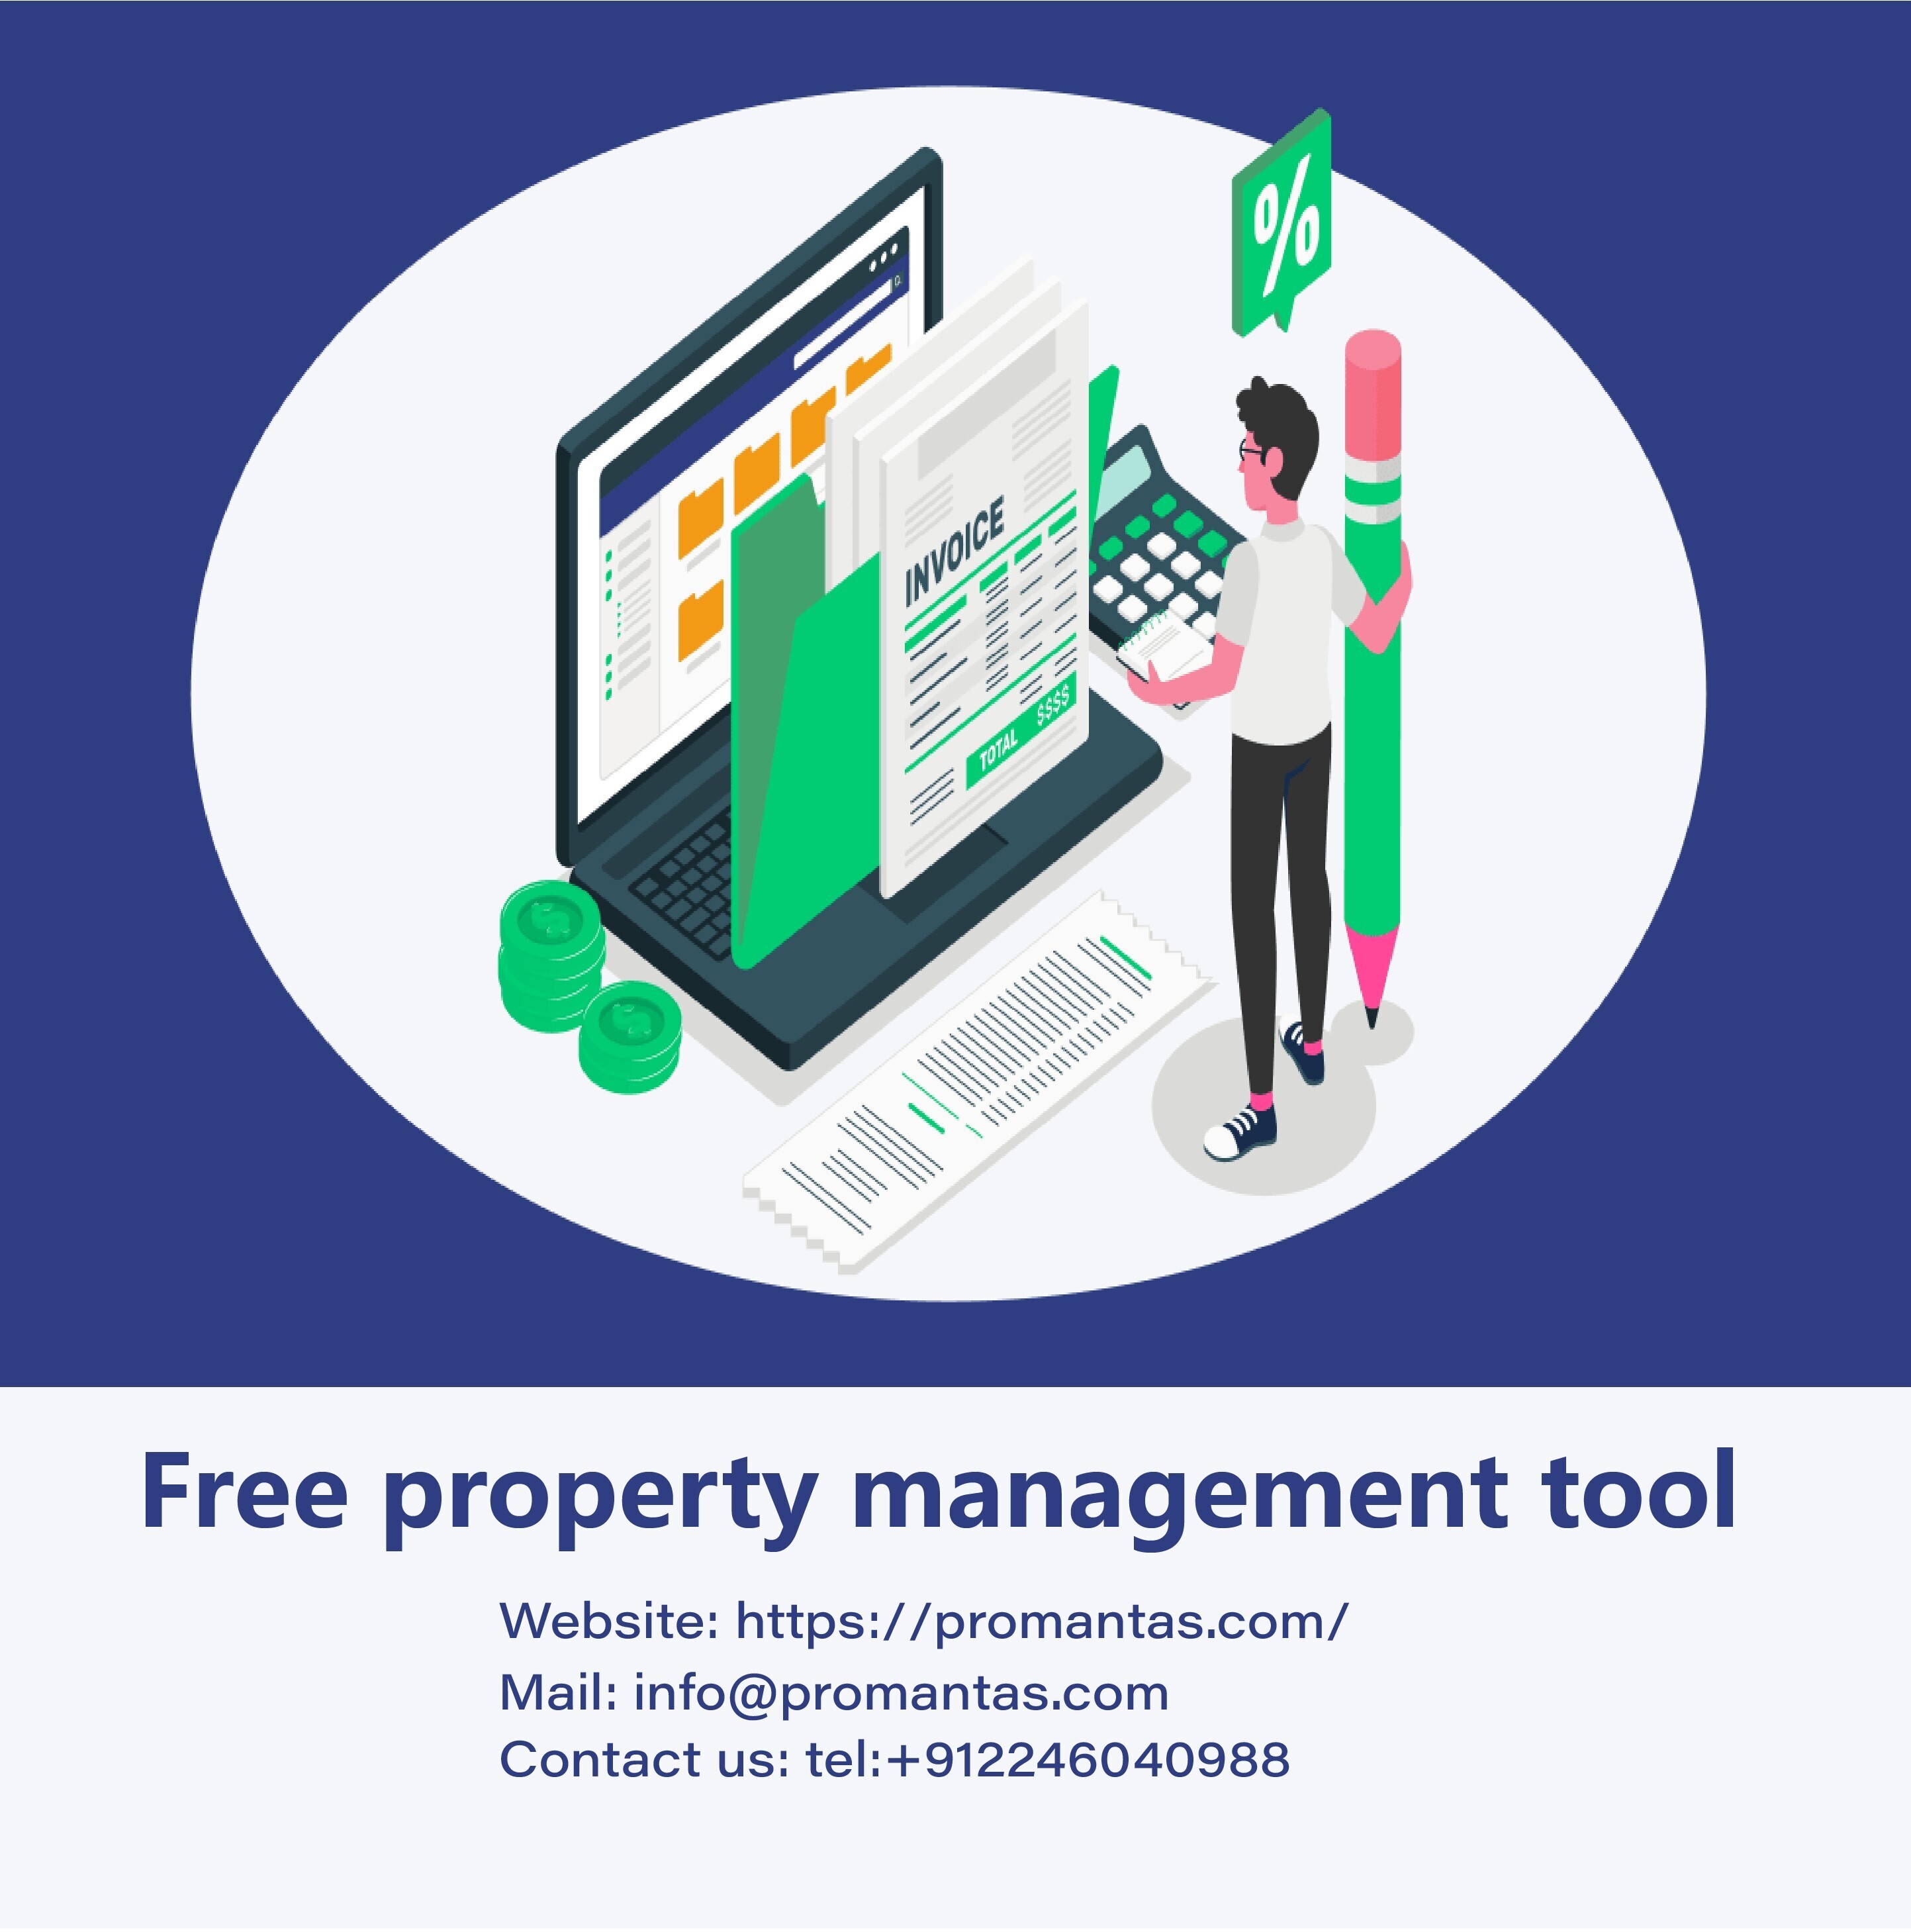  Optimize Management Efforts with a Free Property Management Tool